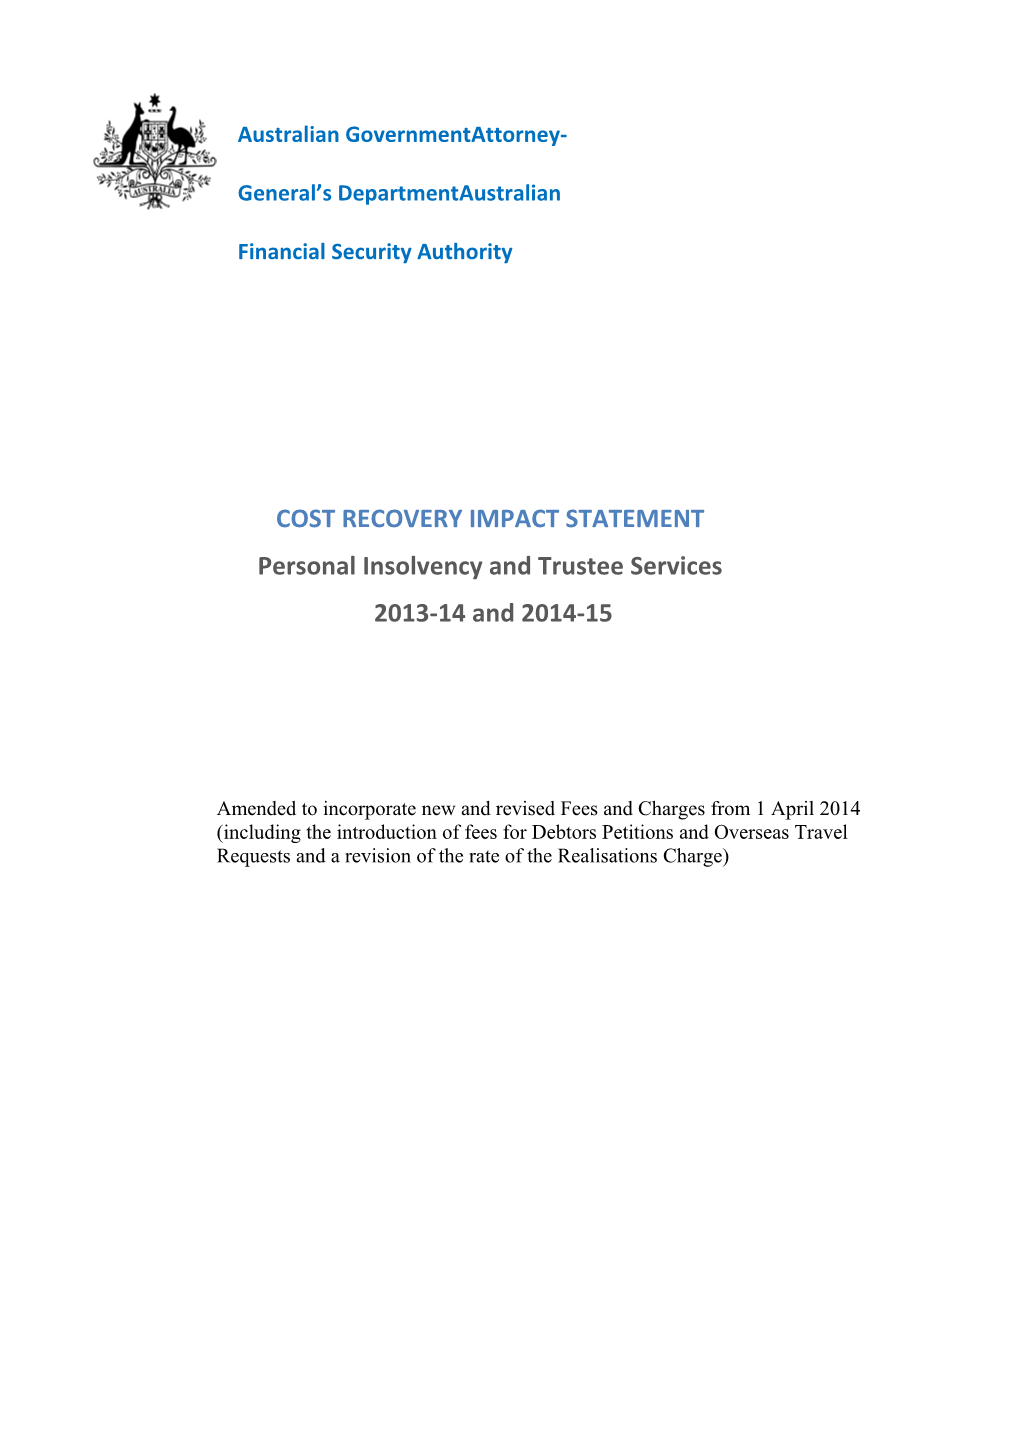 Cost Recovery Impact Statement Personal Insolvency and Trustee Services 2013-14 and 2014-15